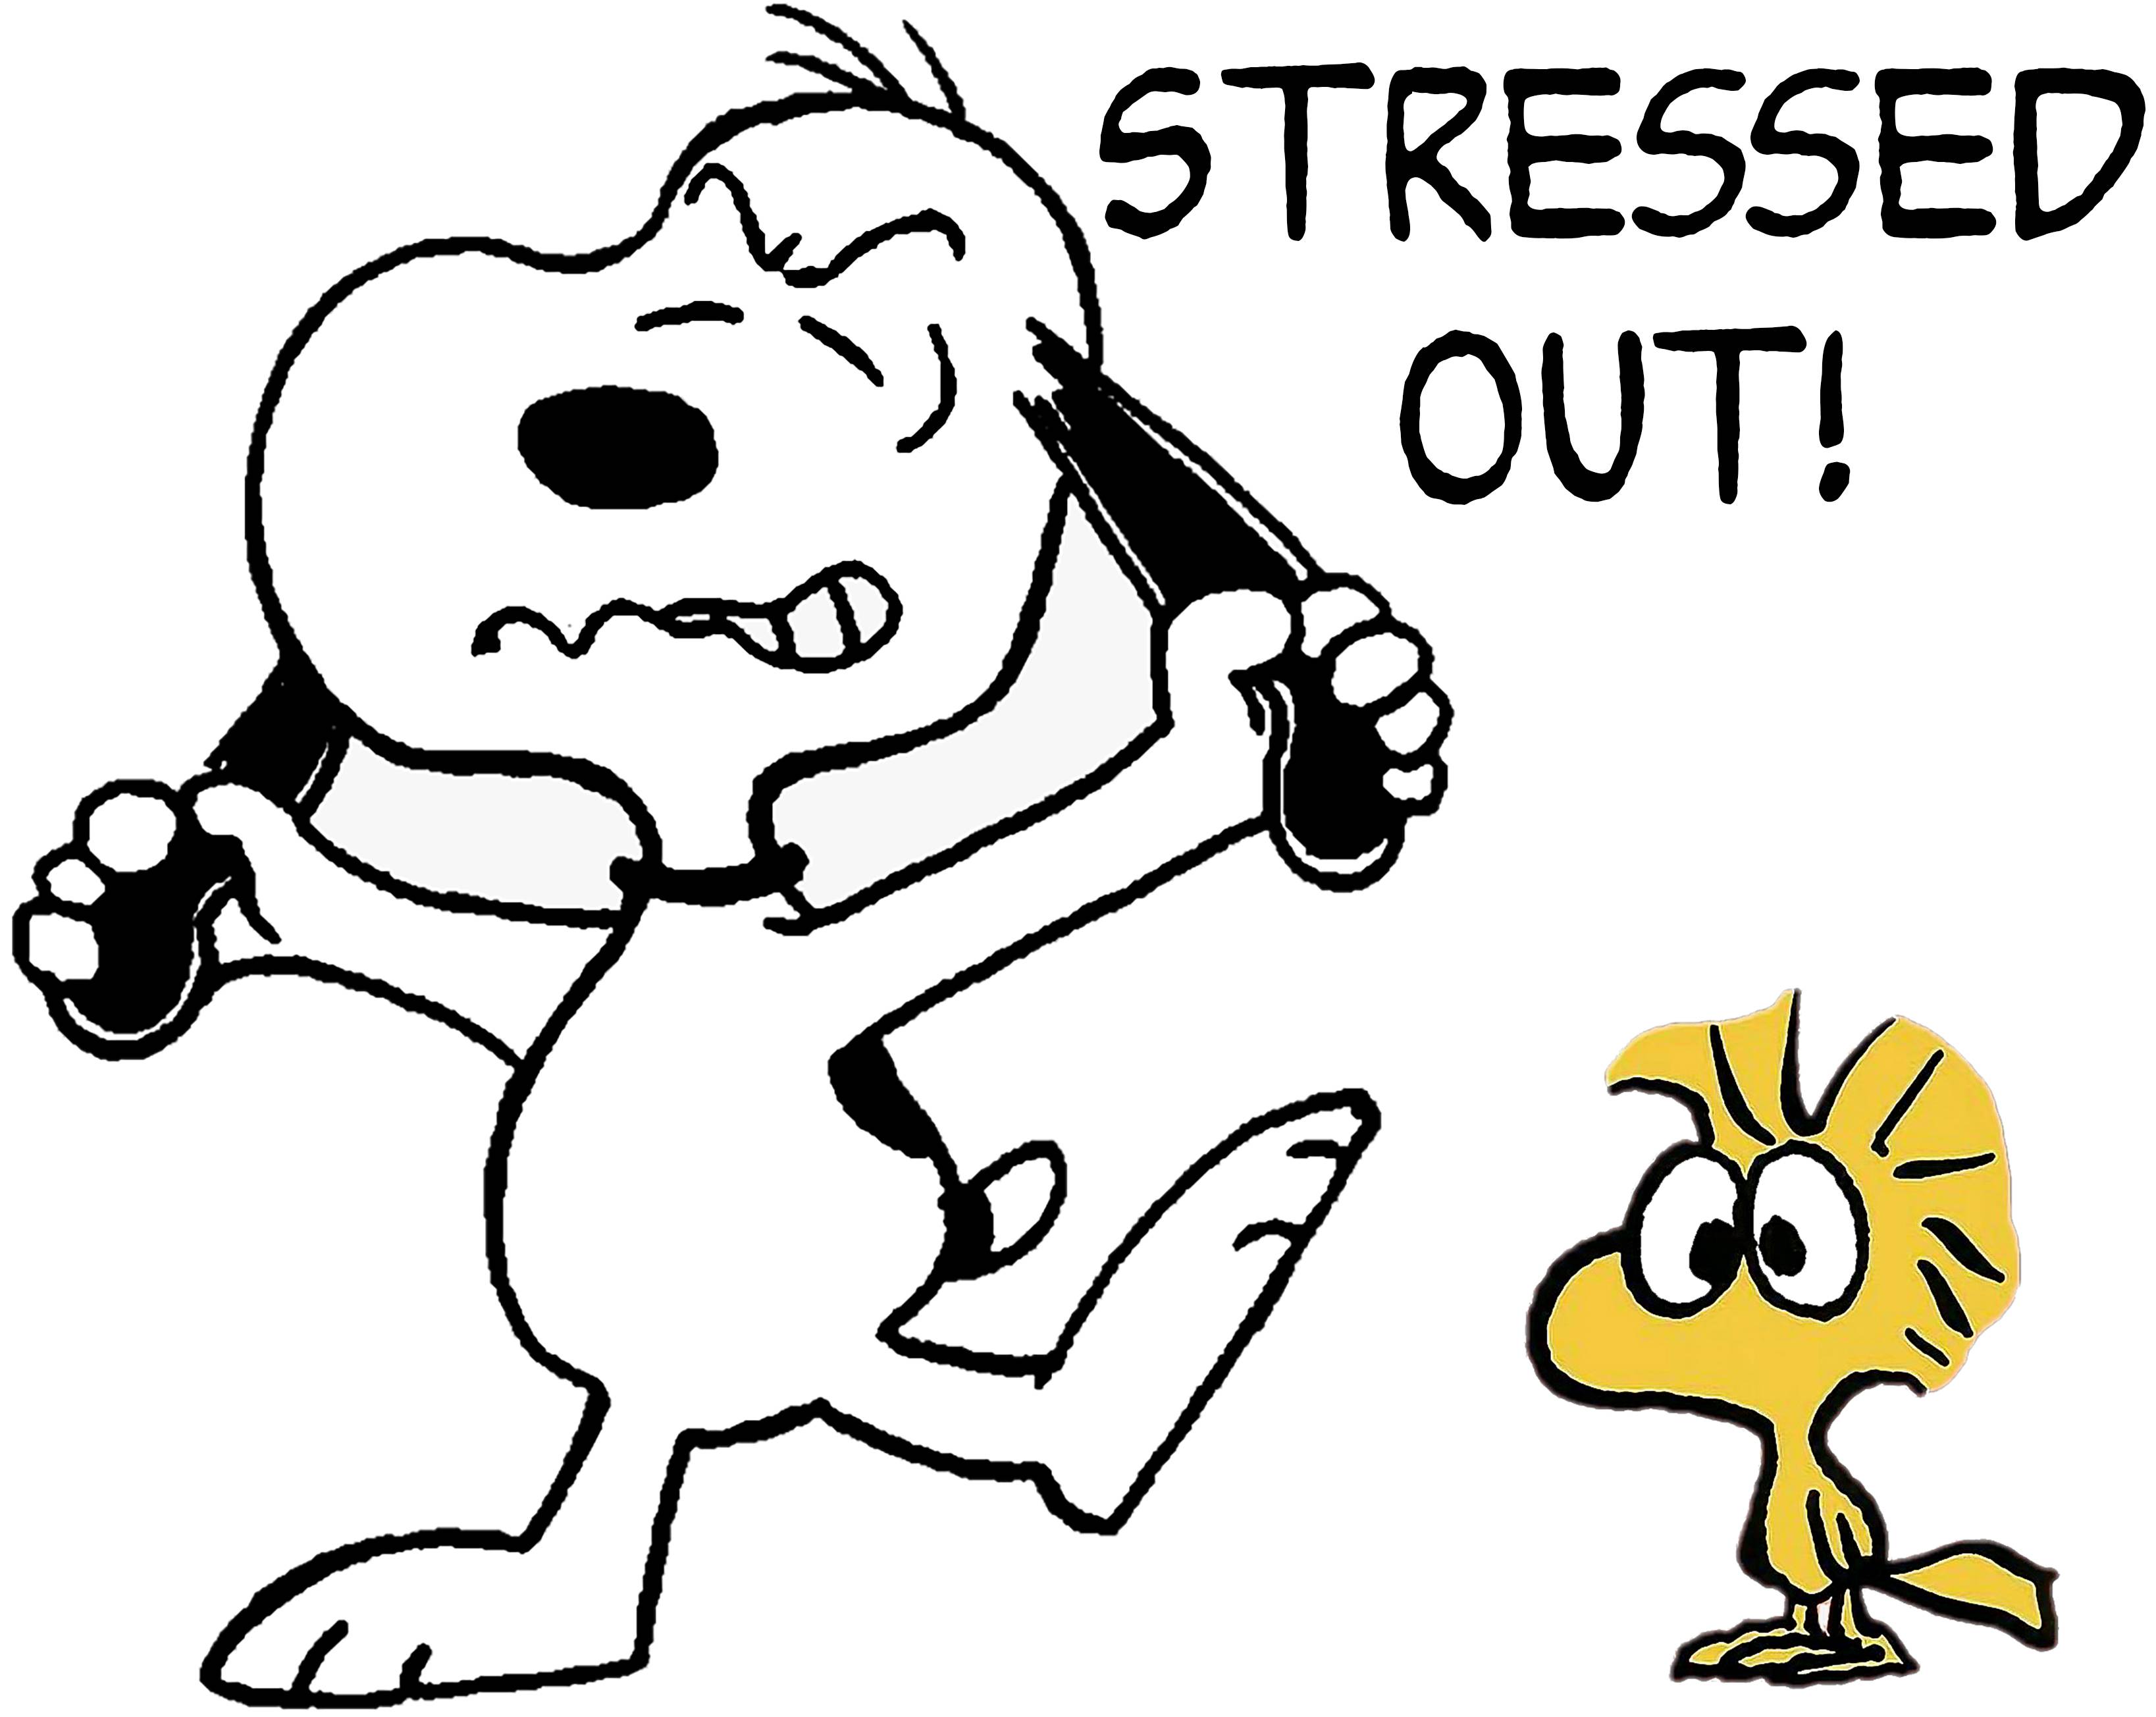 Get Out & Vote!  Snoopy pictures, Snoopy images, Snoopy and woodstock